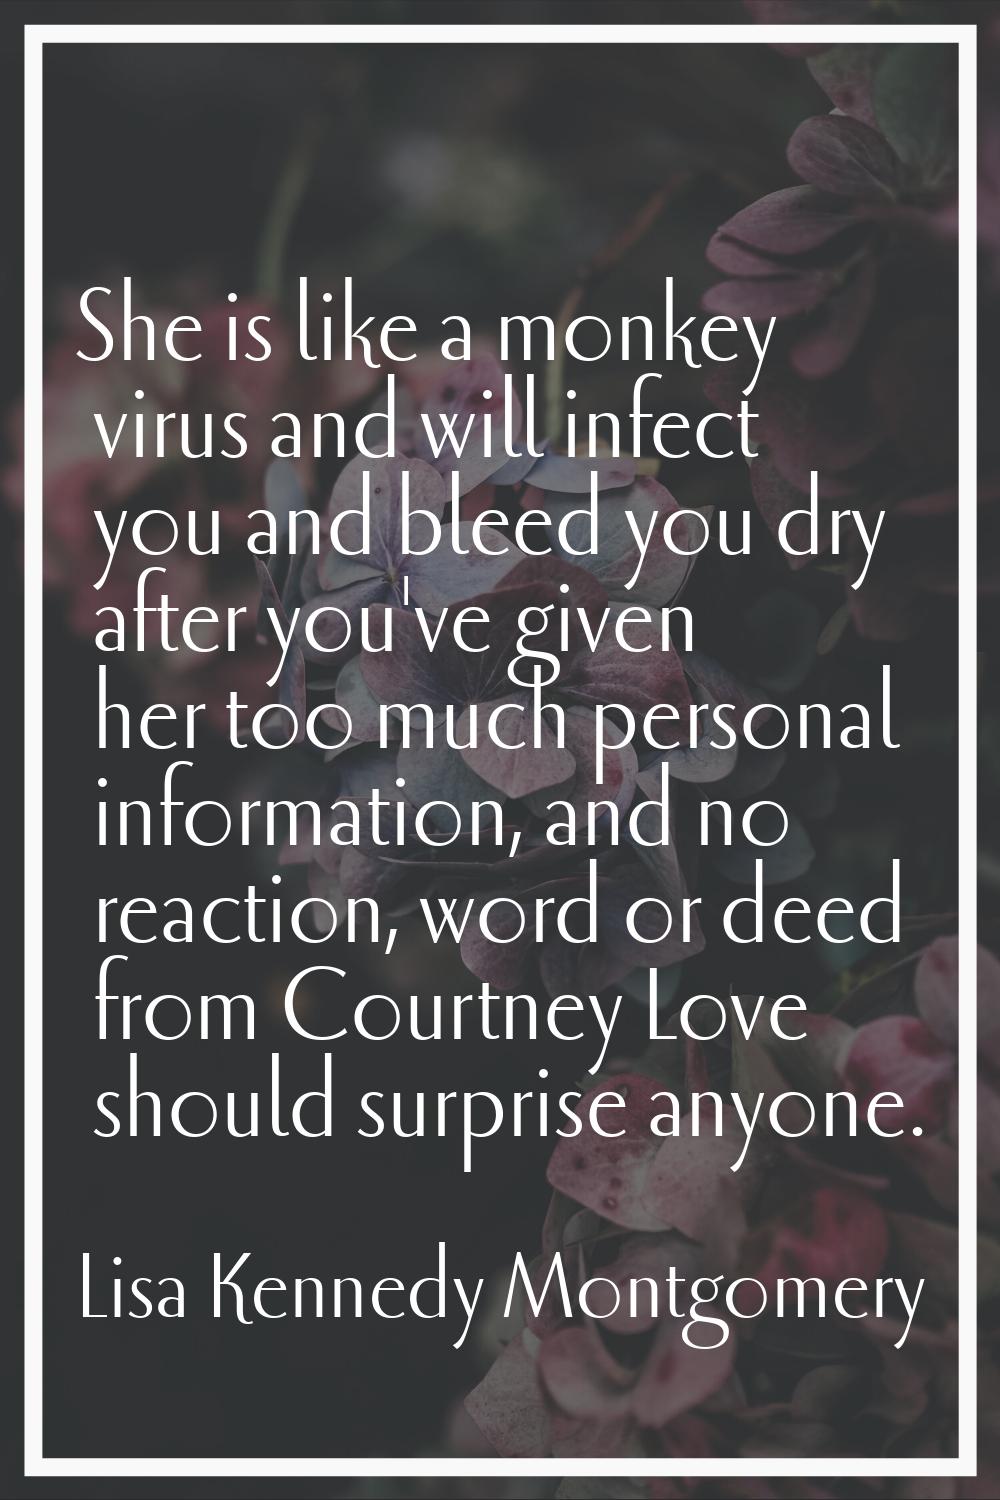 She is like a monkey virus and will infect you and bleed you dry after you've given her too much pe